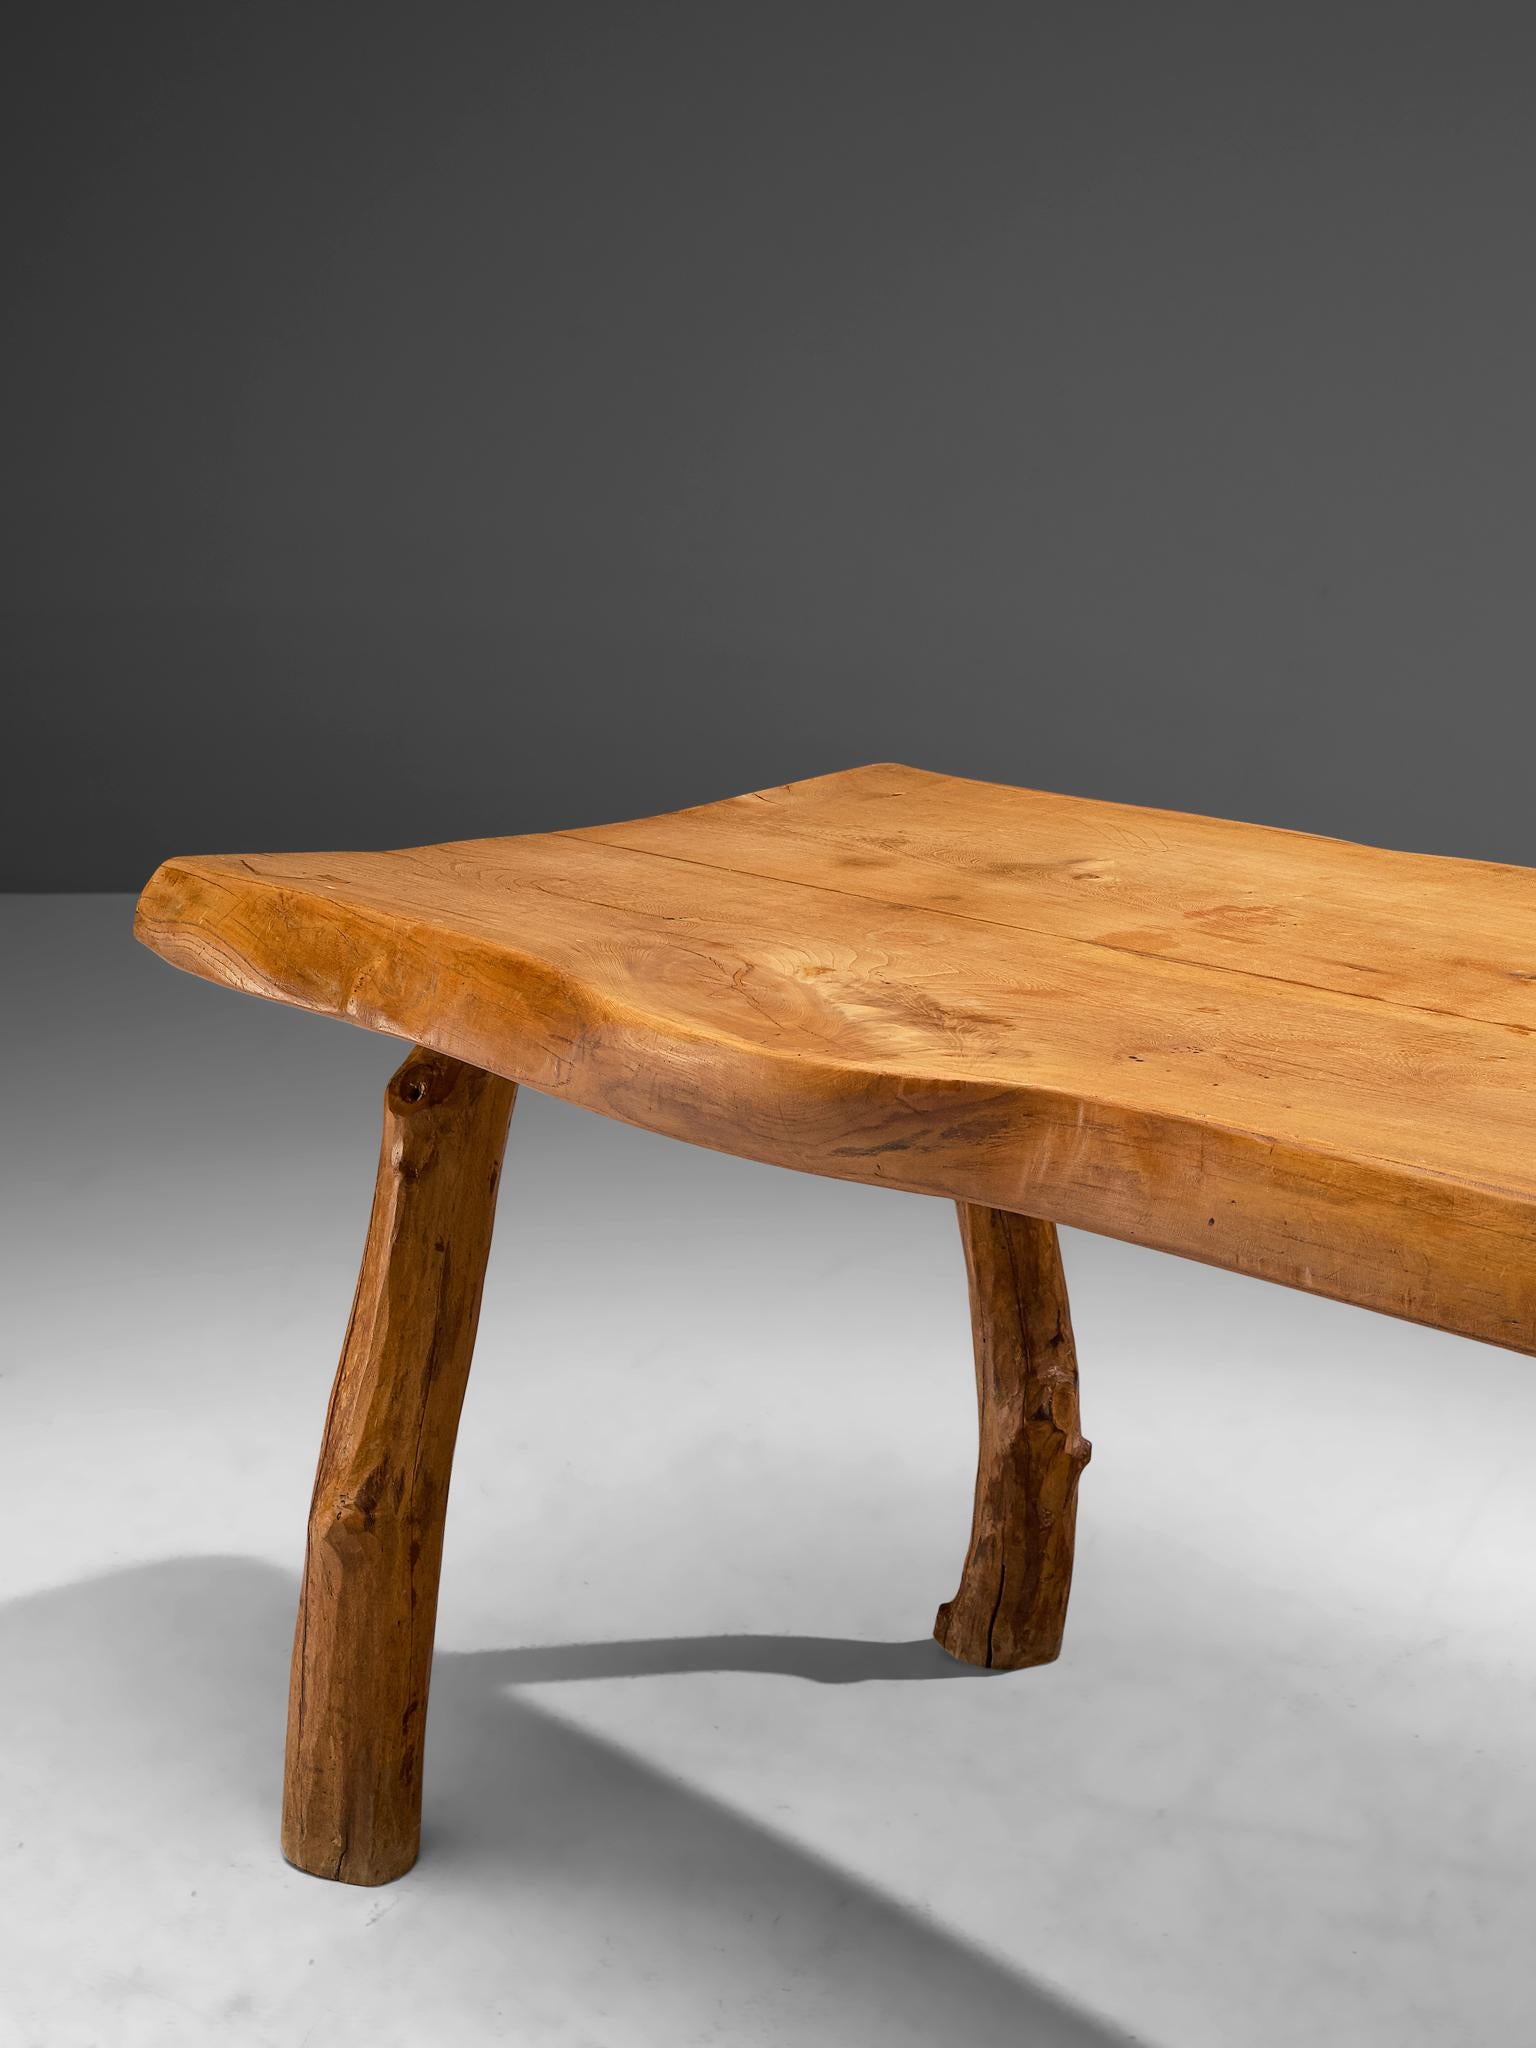 French Organic Shaped Table in Solid Oak